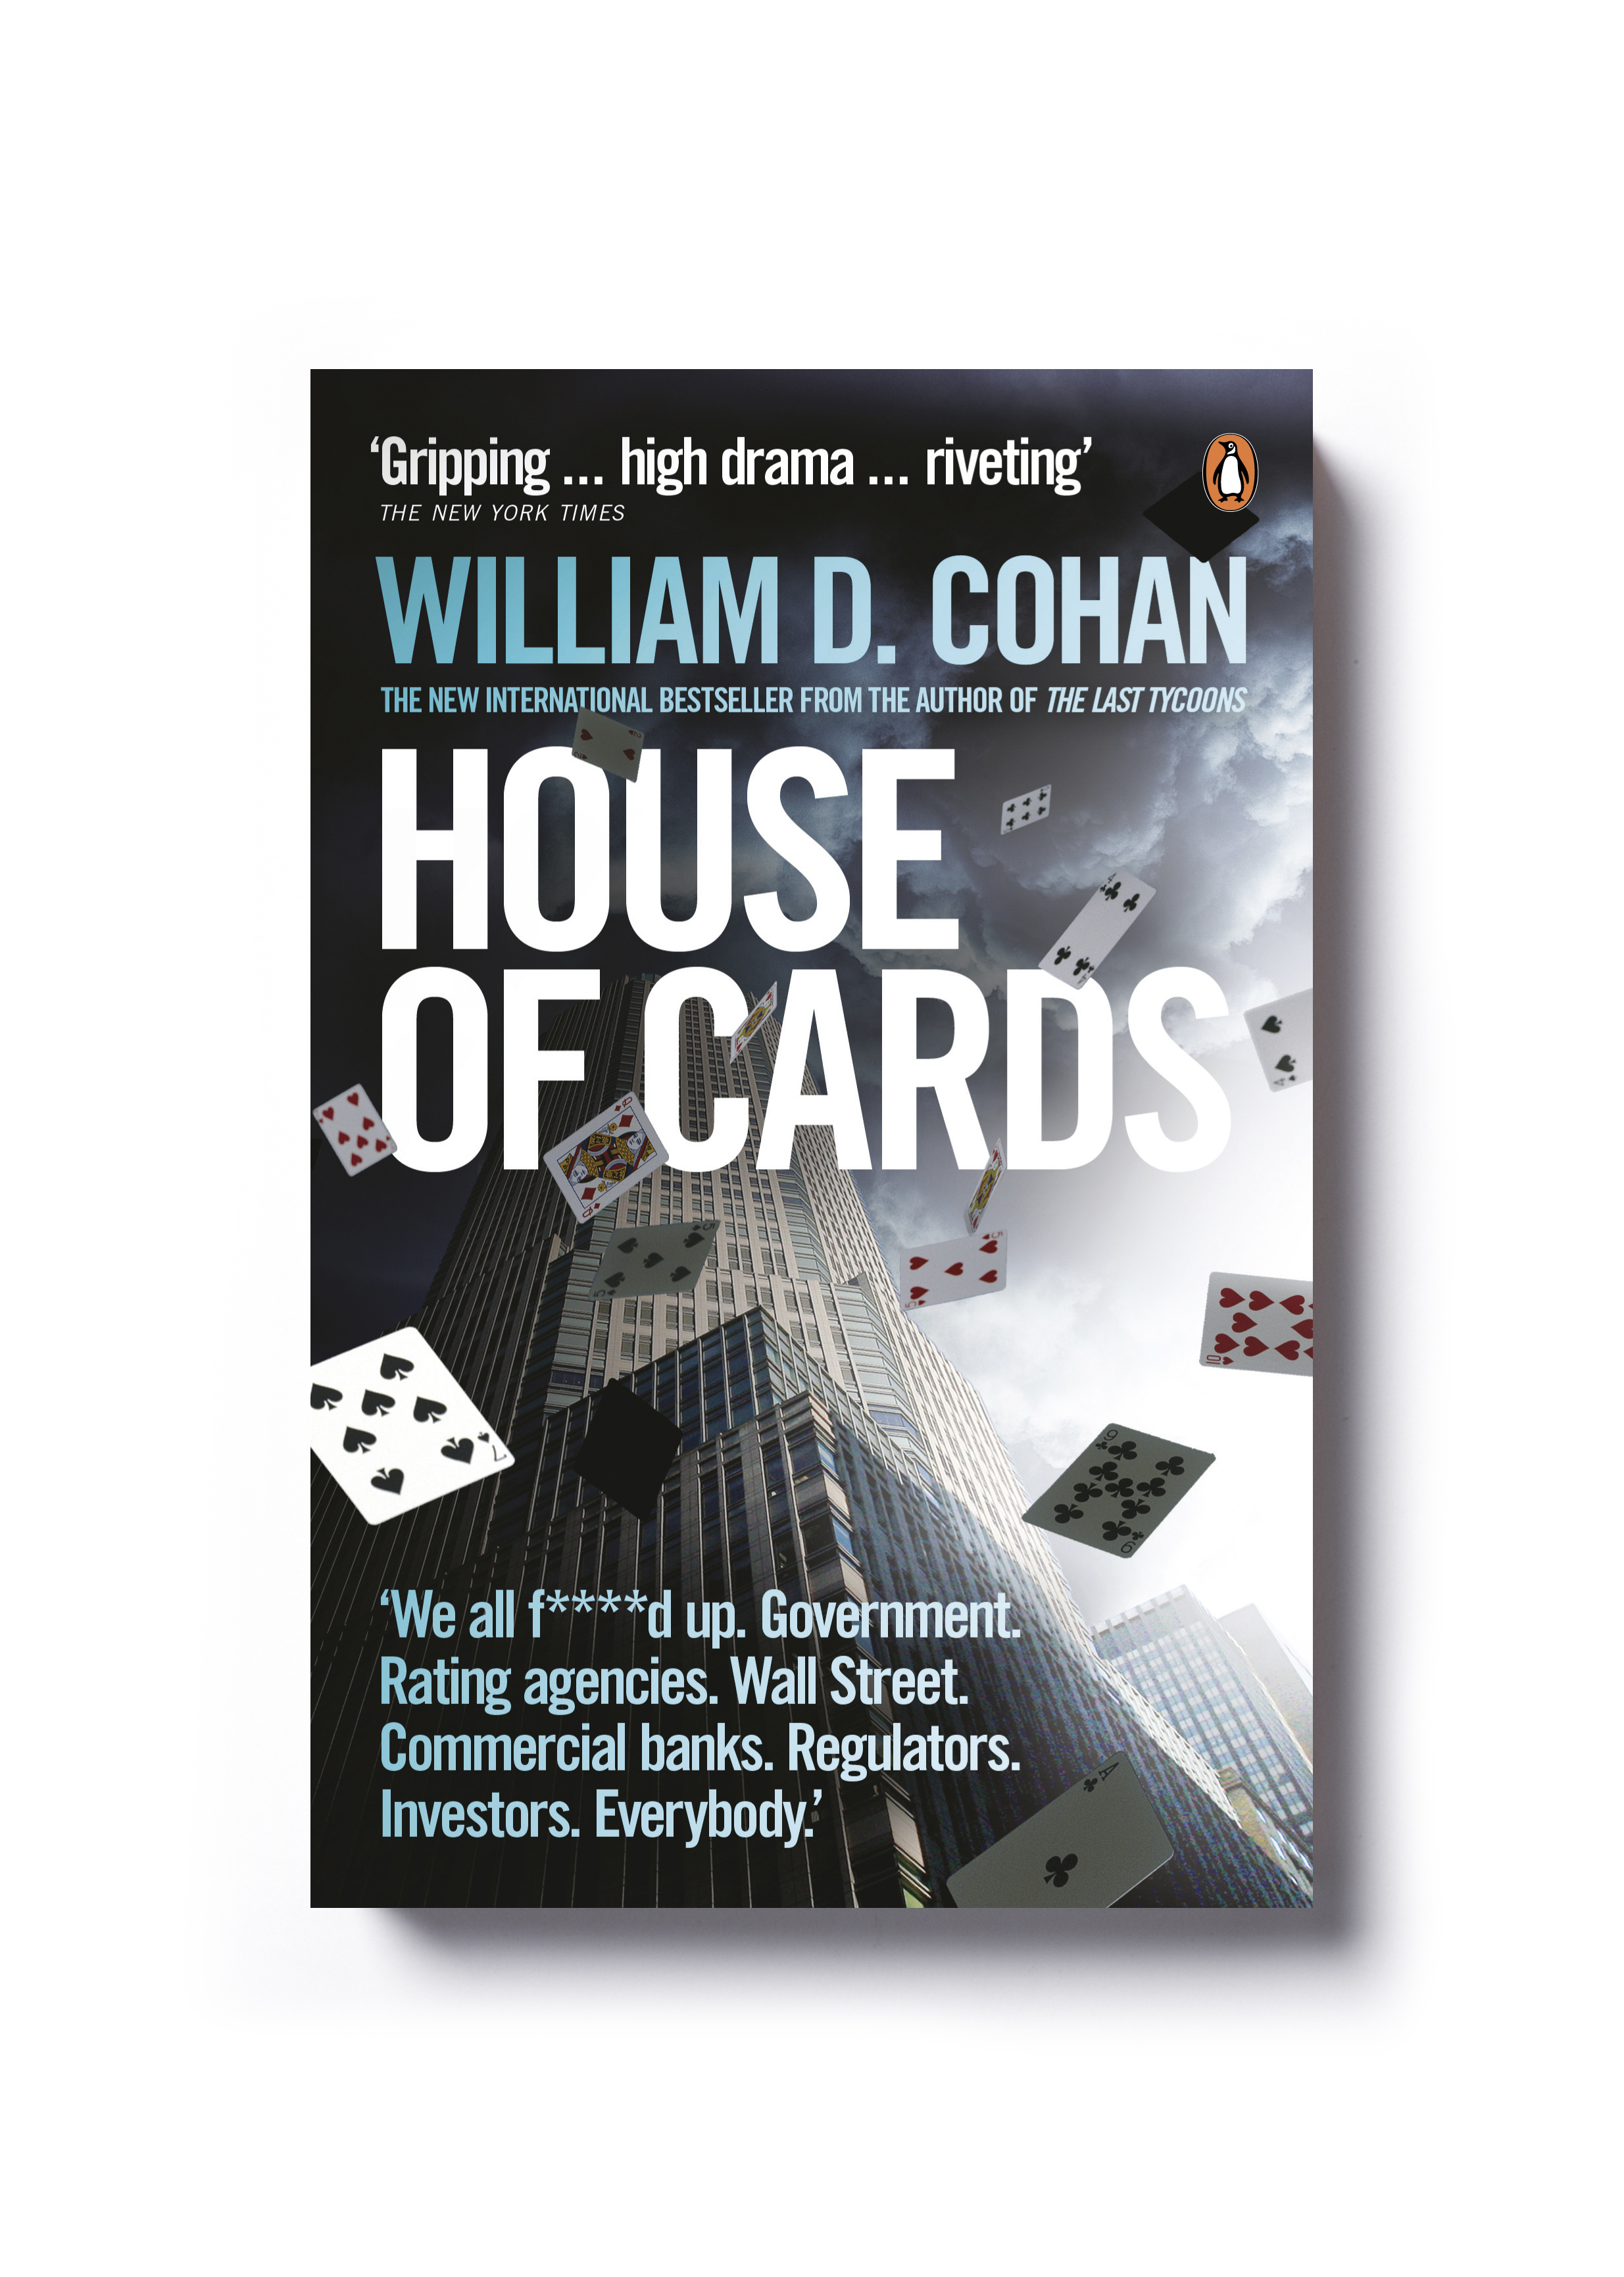  House of Cards by William D. Cohan - Design: Jim Stoddart  